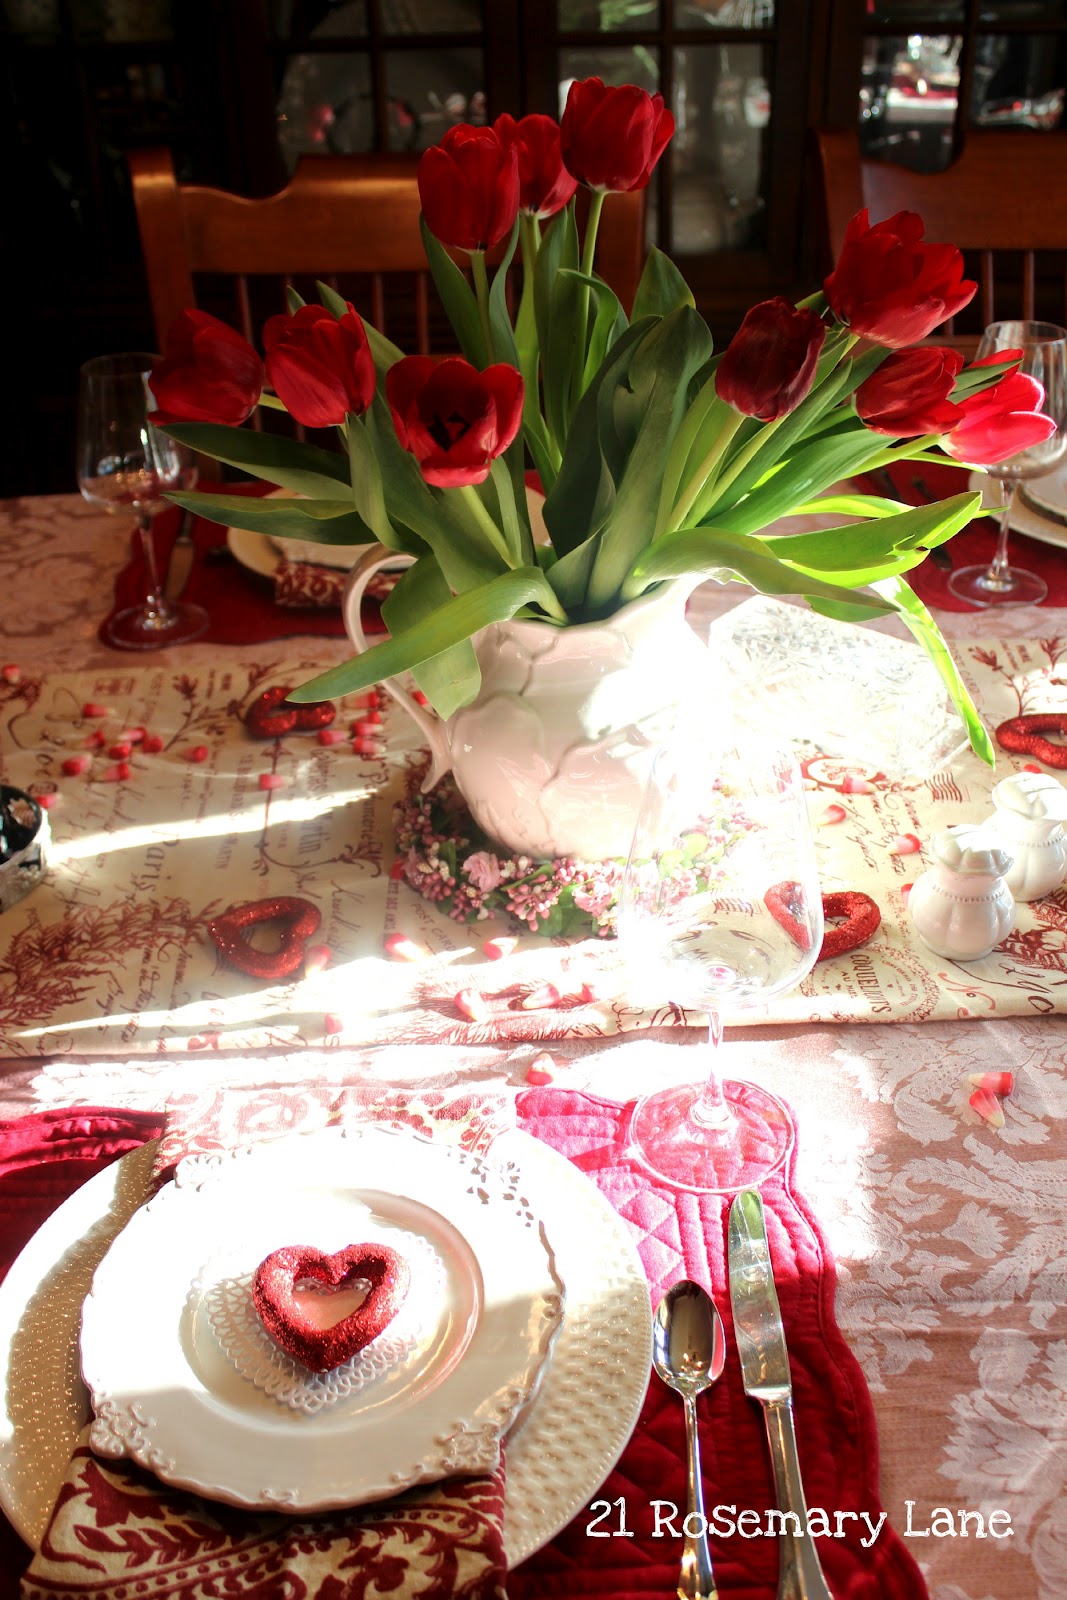 21 Rosemary Lane: St. Valentine's Day Tablescape and Vignette1067 x 1600